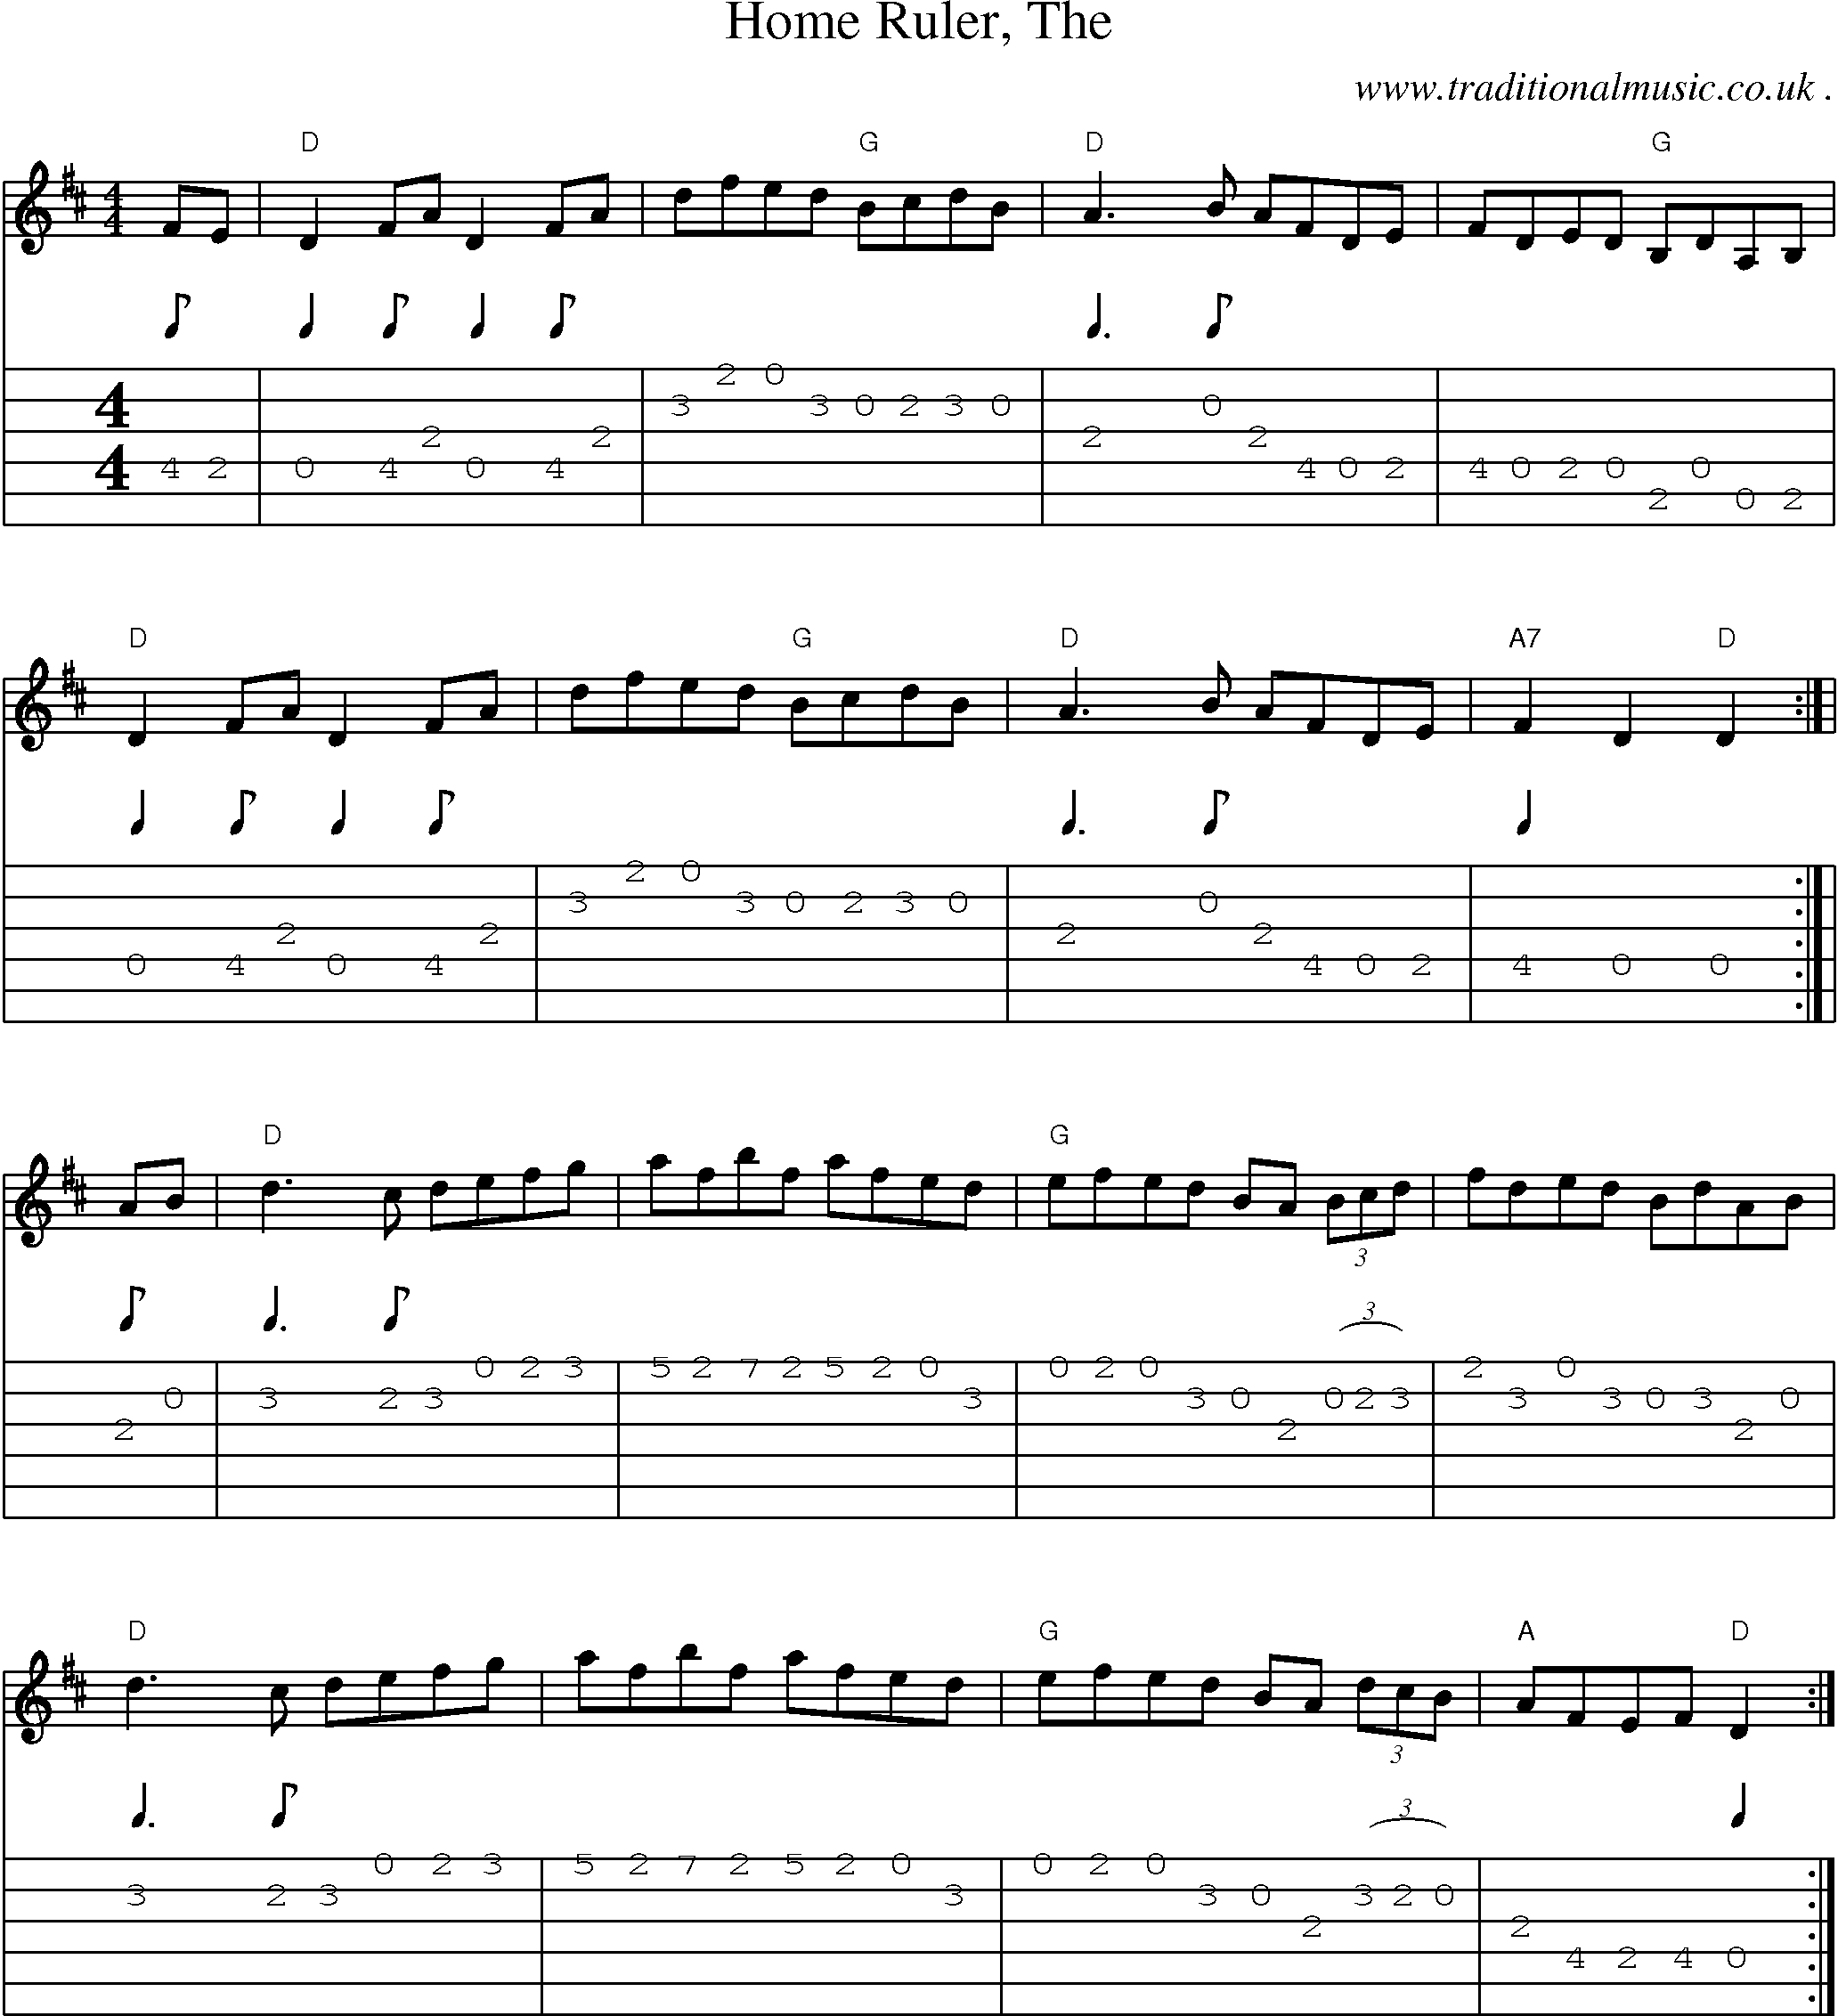 Music Score and Guitar Tabs for Home Ruler The